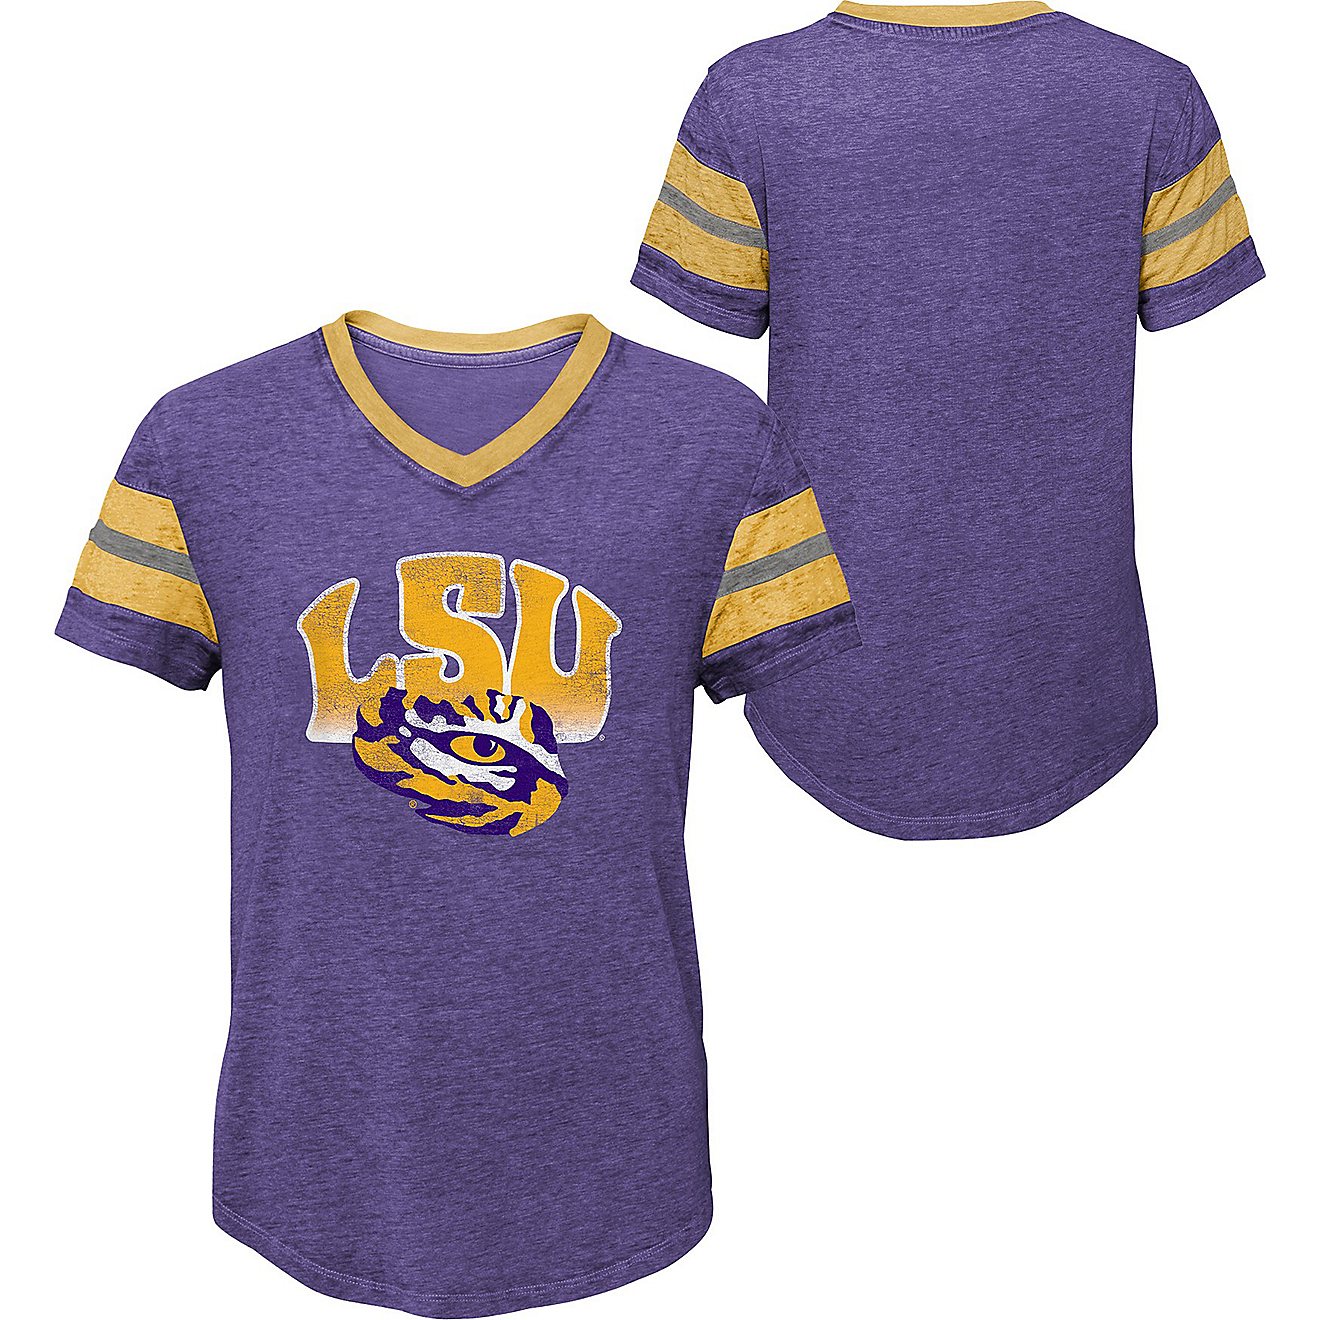 Outerstuff Girls' Louisiana State University Catch The Wave T-shirt                                                              - view number 3